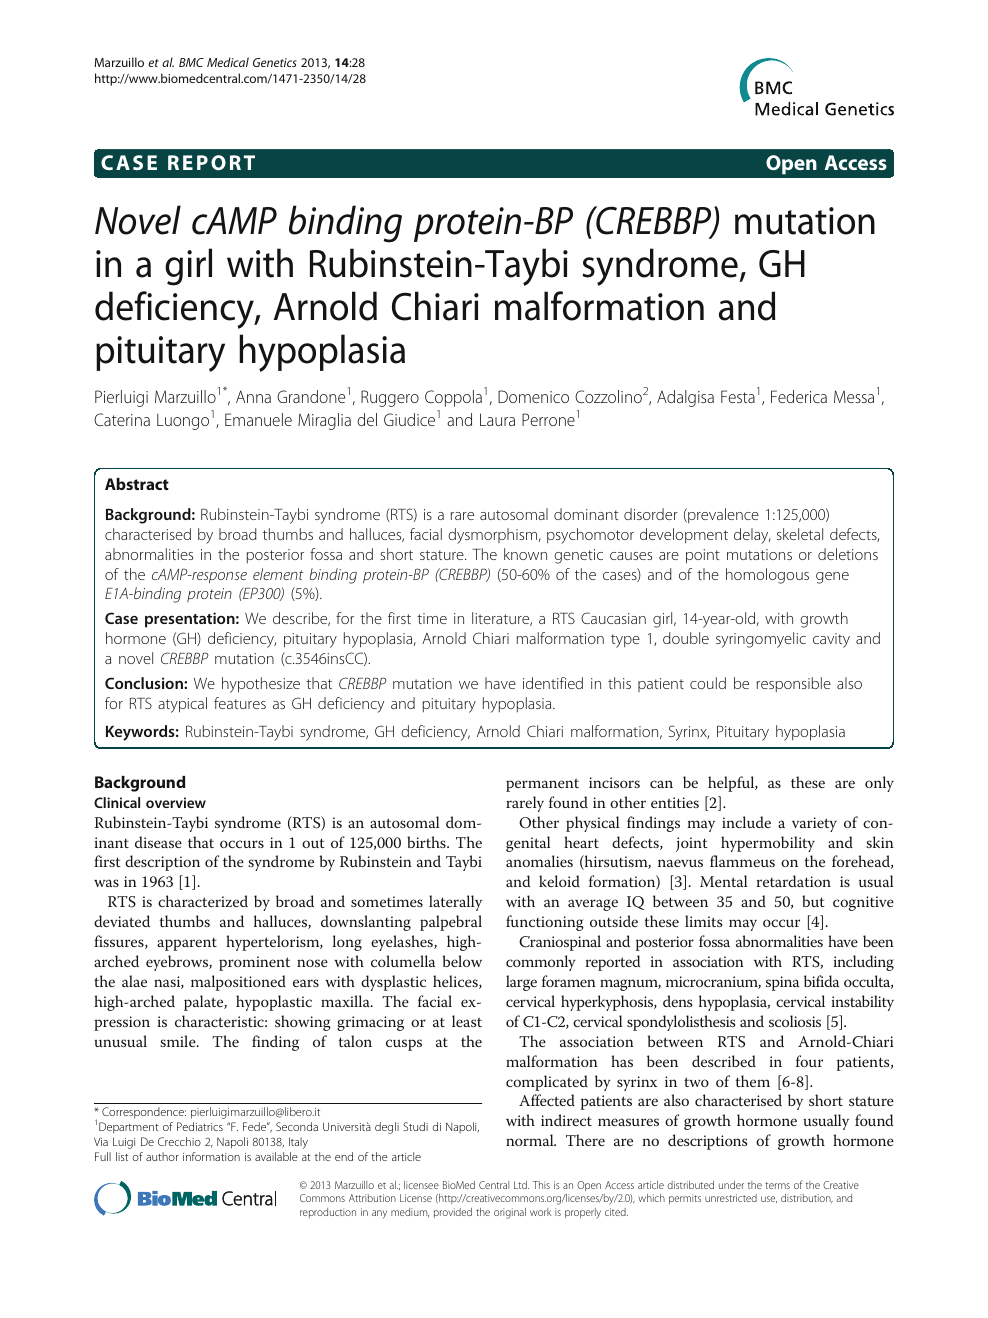 First case report of inherited Rubinstein-Taybi syndrome associated with a  novel EP300 variant, BMC Medical Genetics